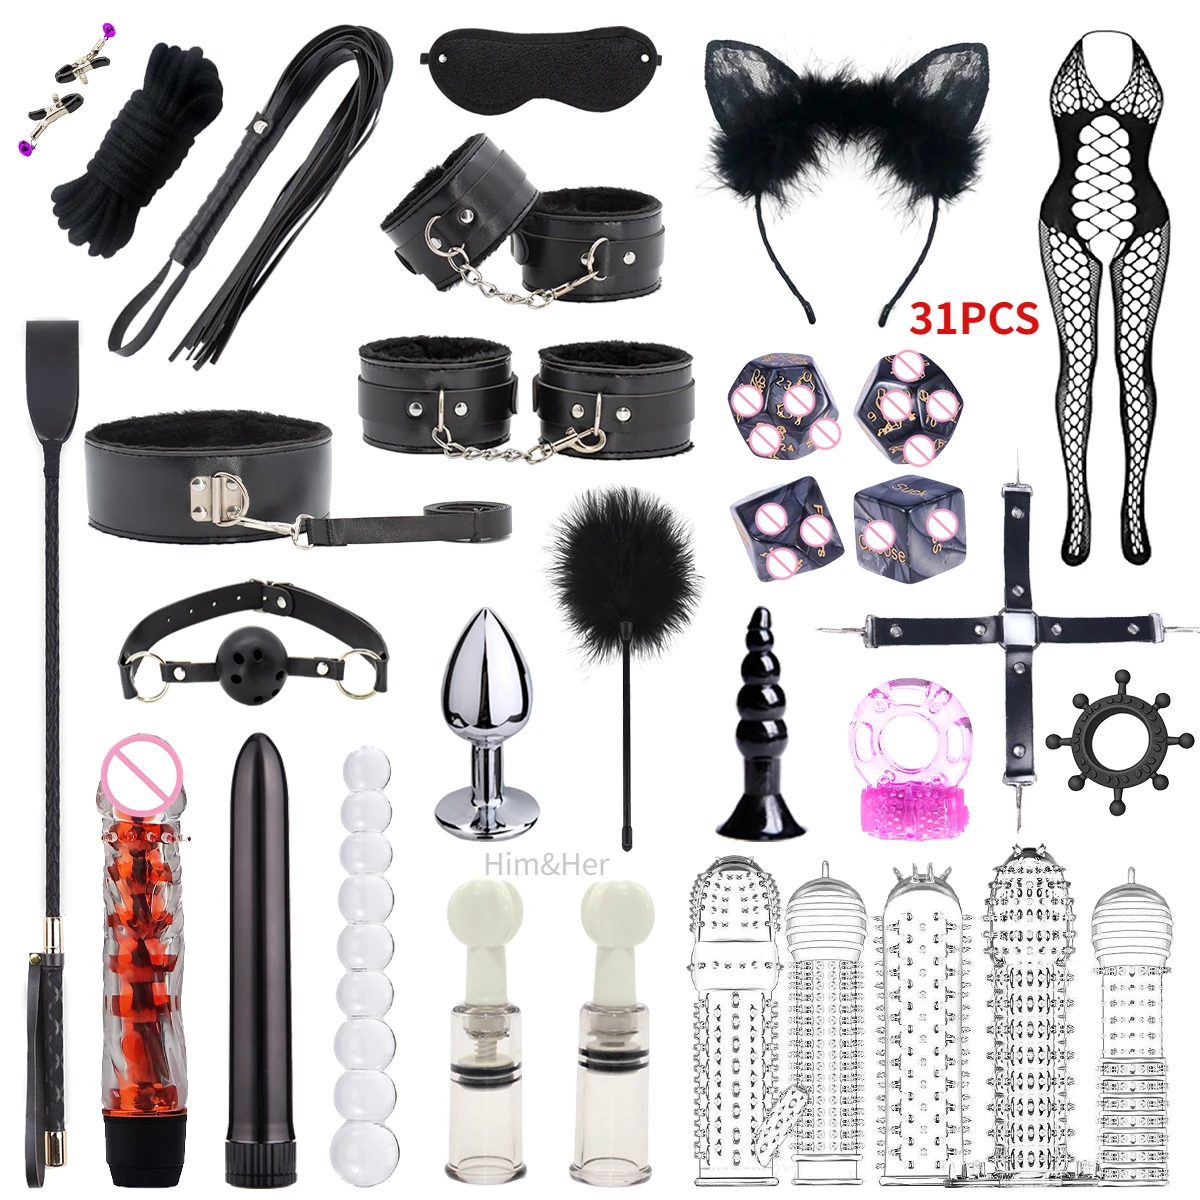 NEW BDSM Sexy Leather Plush Sex Bondage Set Handcuffs Sex Games Whip Gag Nipple Clamps Sex Toys Sex Appeal Multiple Choices 18+